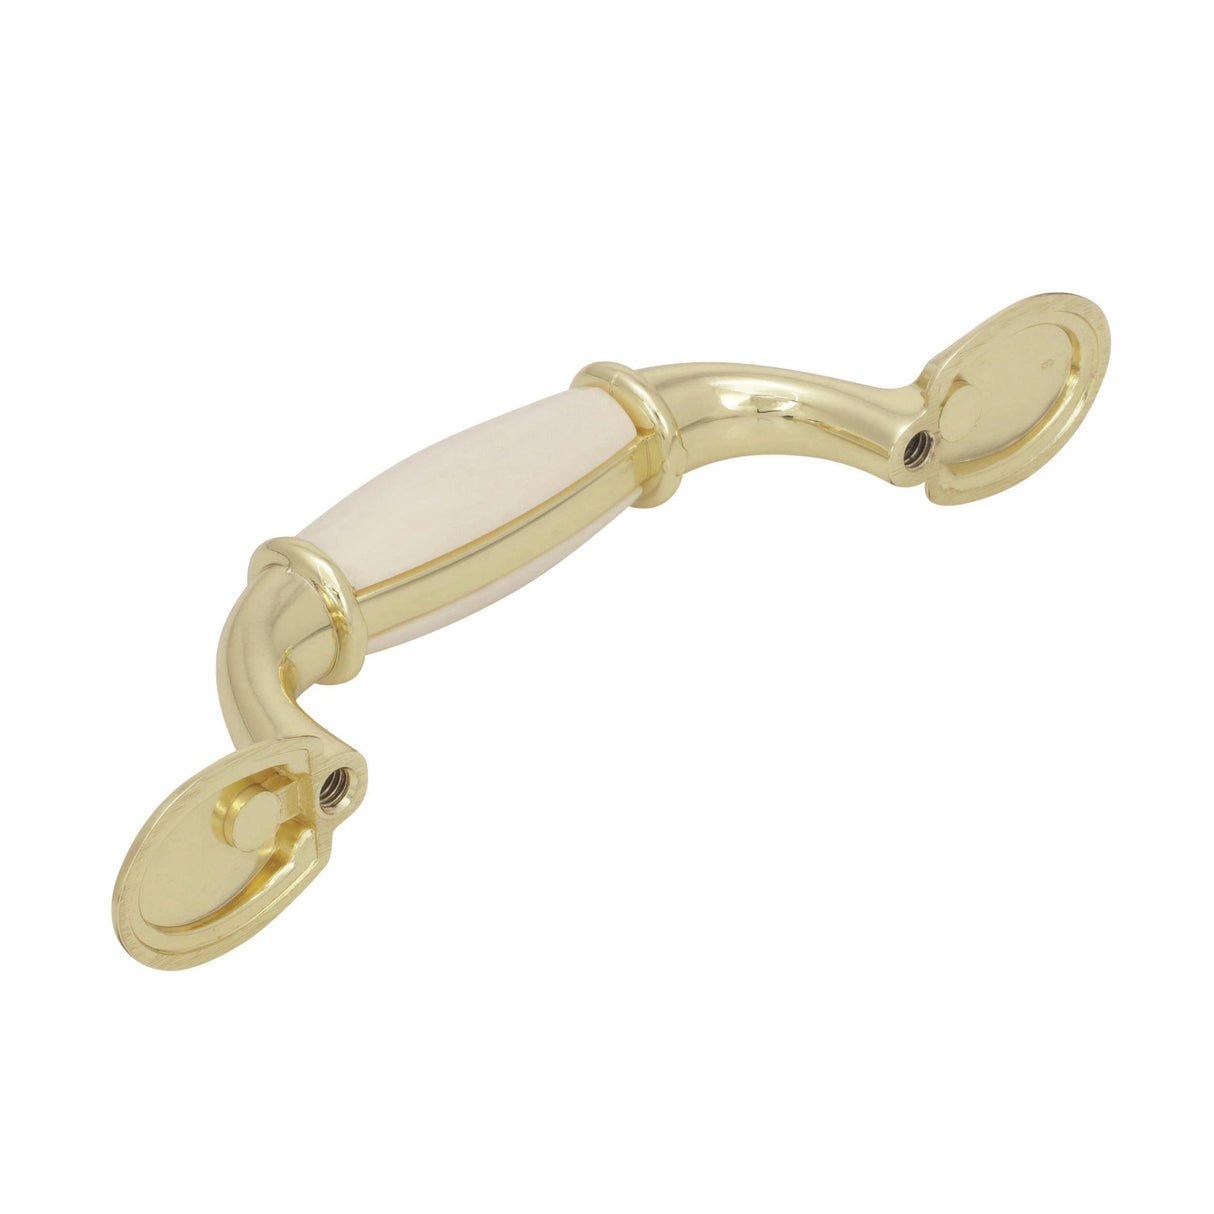 Amerock Cabinet Pull White / Polished Brass 3 inch (76 mm) Center to Center Everyday Heritage 1 Pack Drawer Pull Drawer Handle Cabinet Hardware